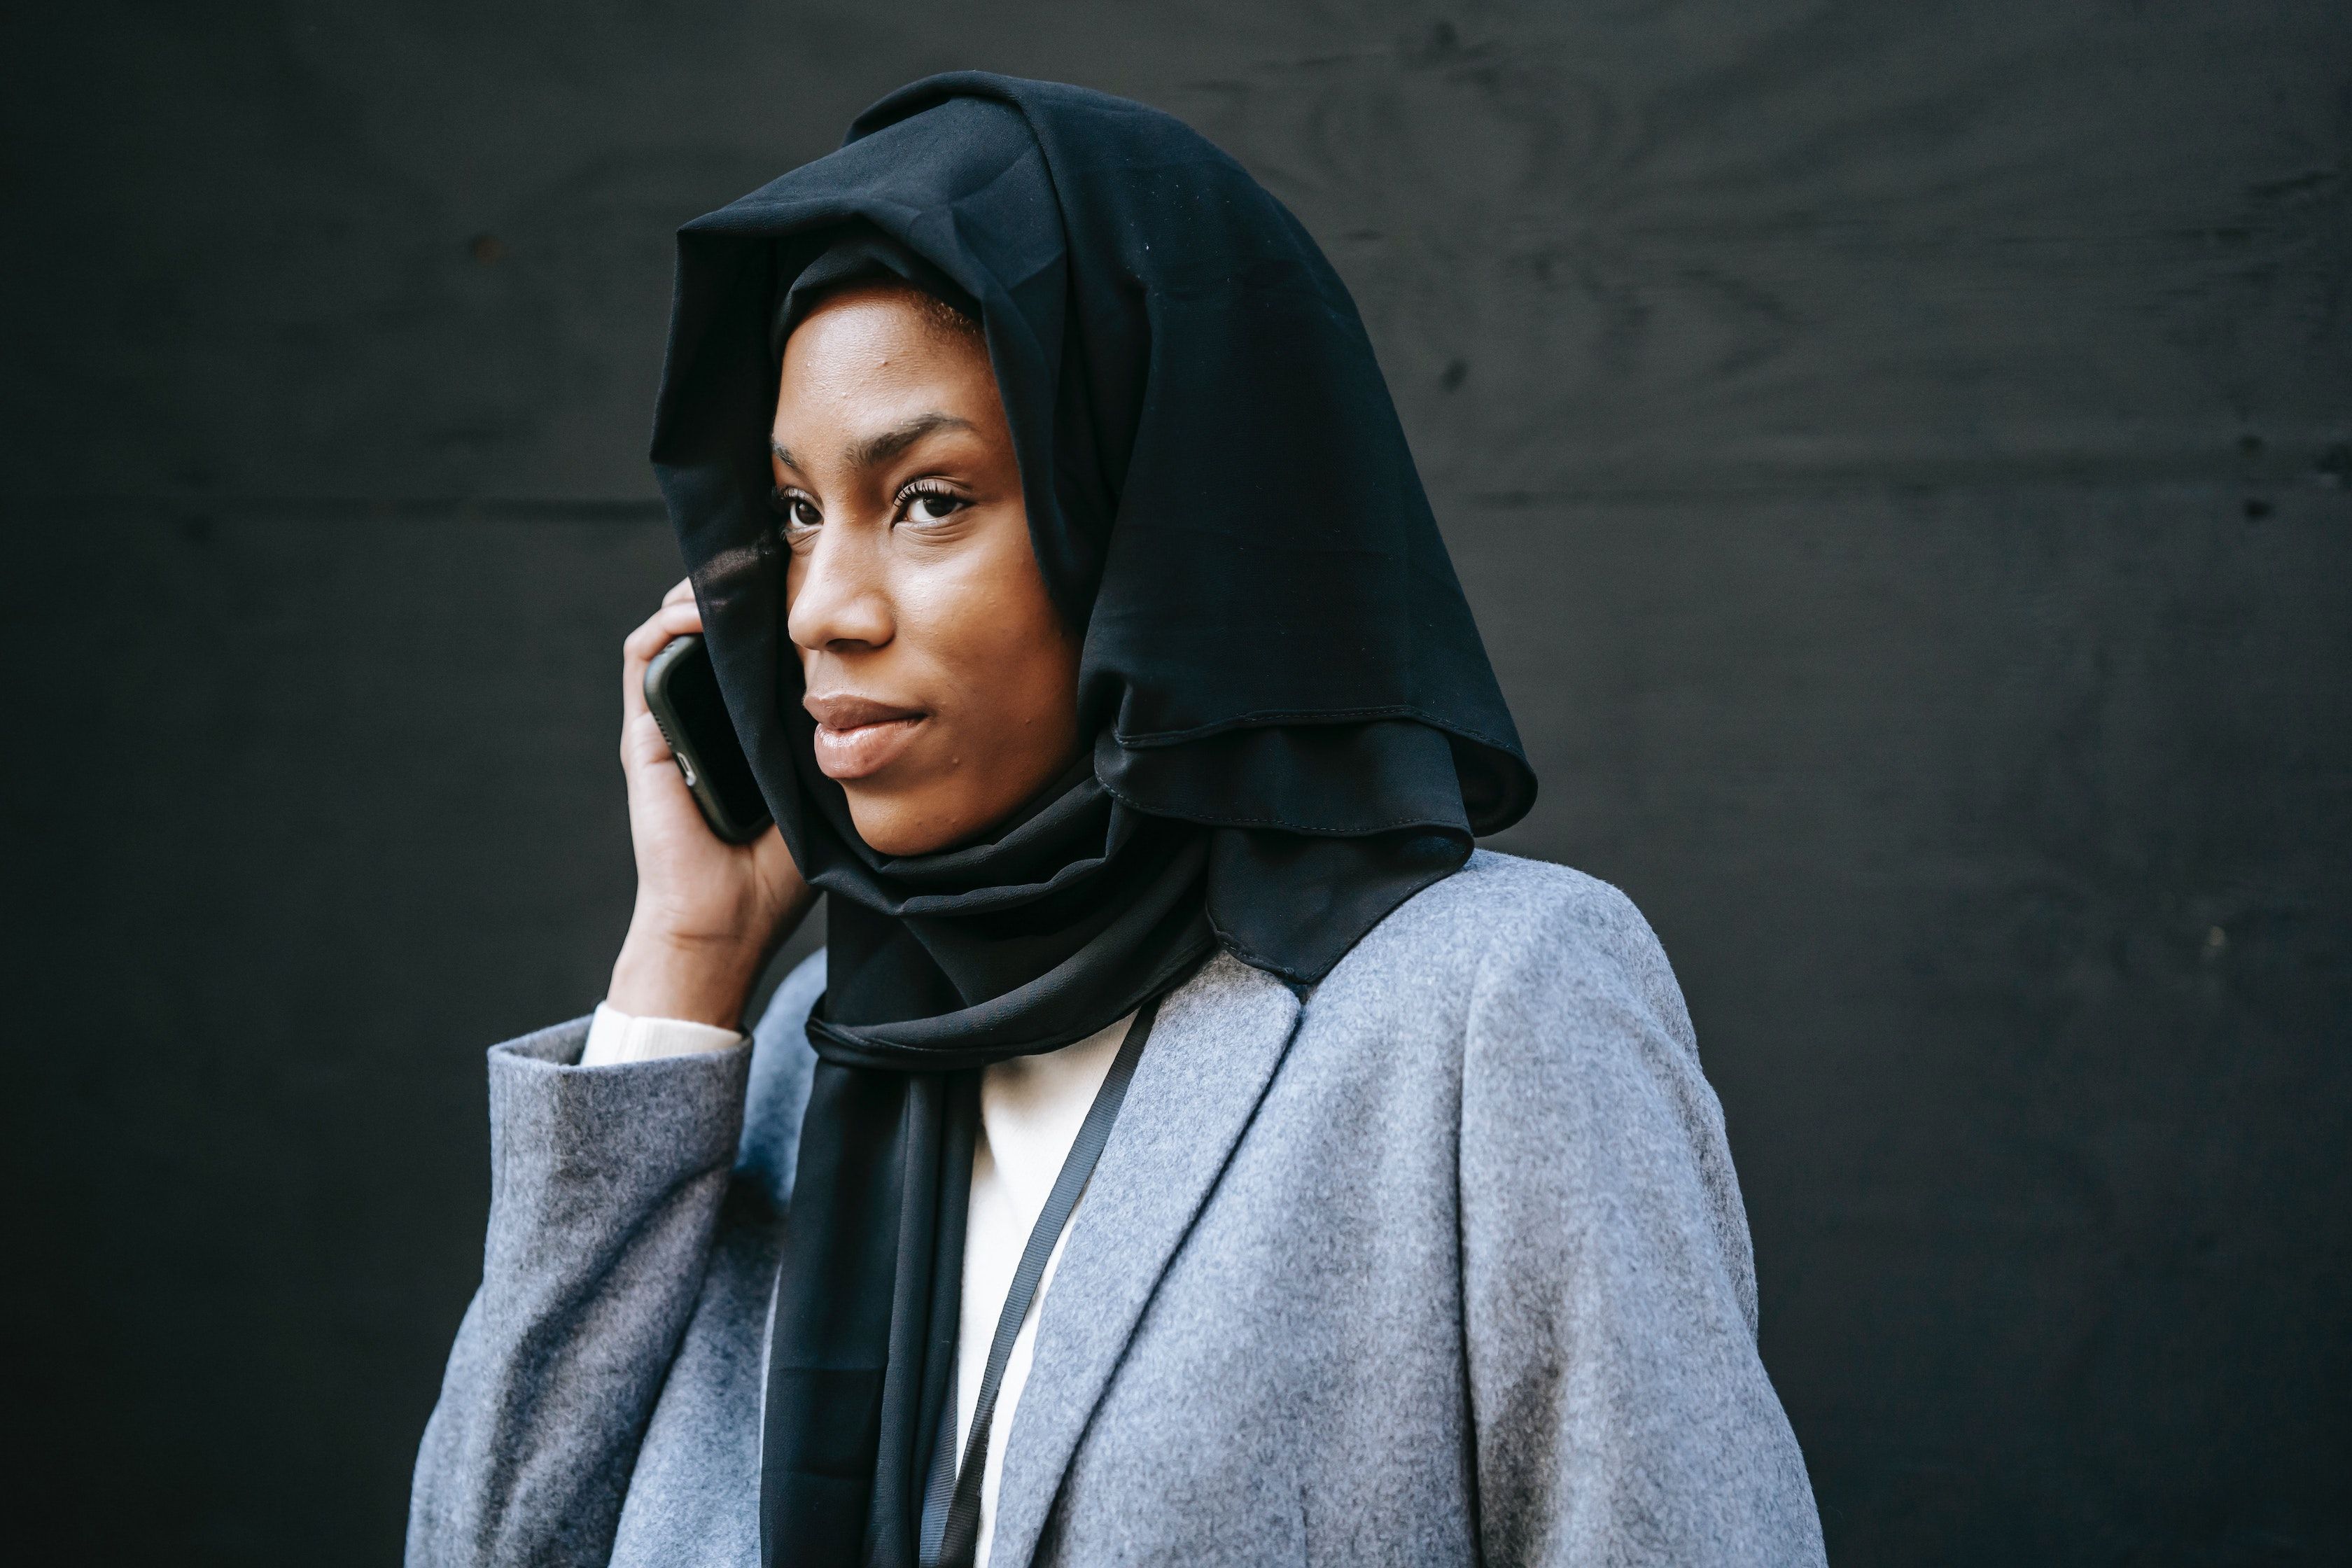 Young woman in blazer and headscarf holds cell phone to her ear, against a dark gray wall